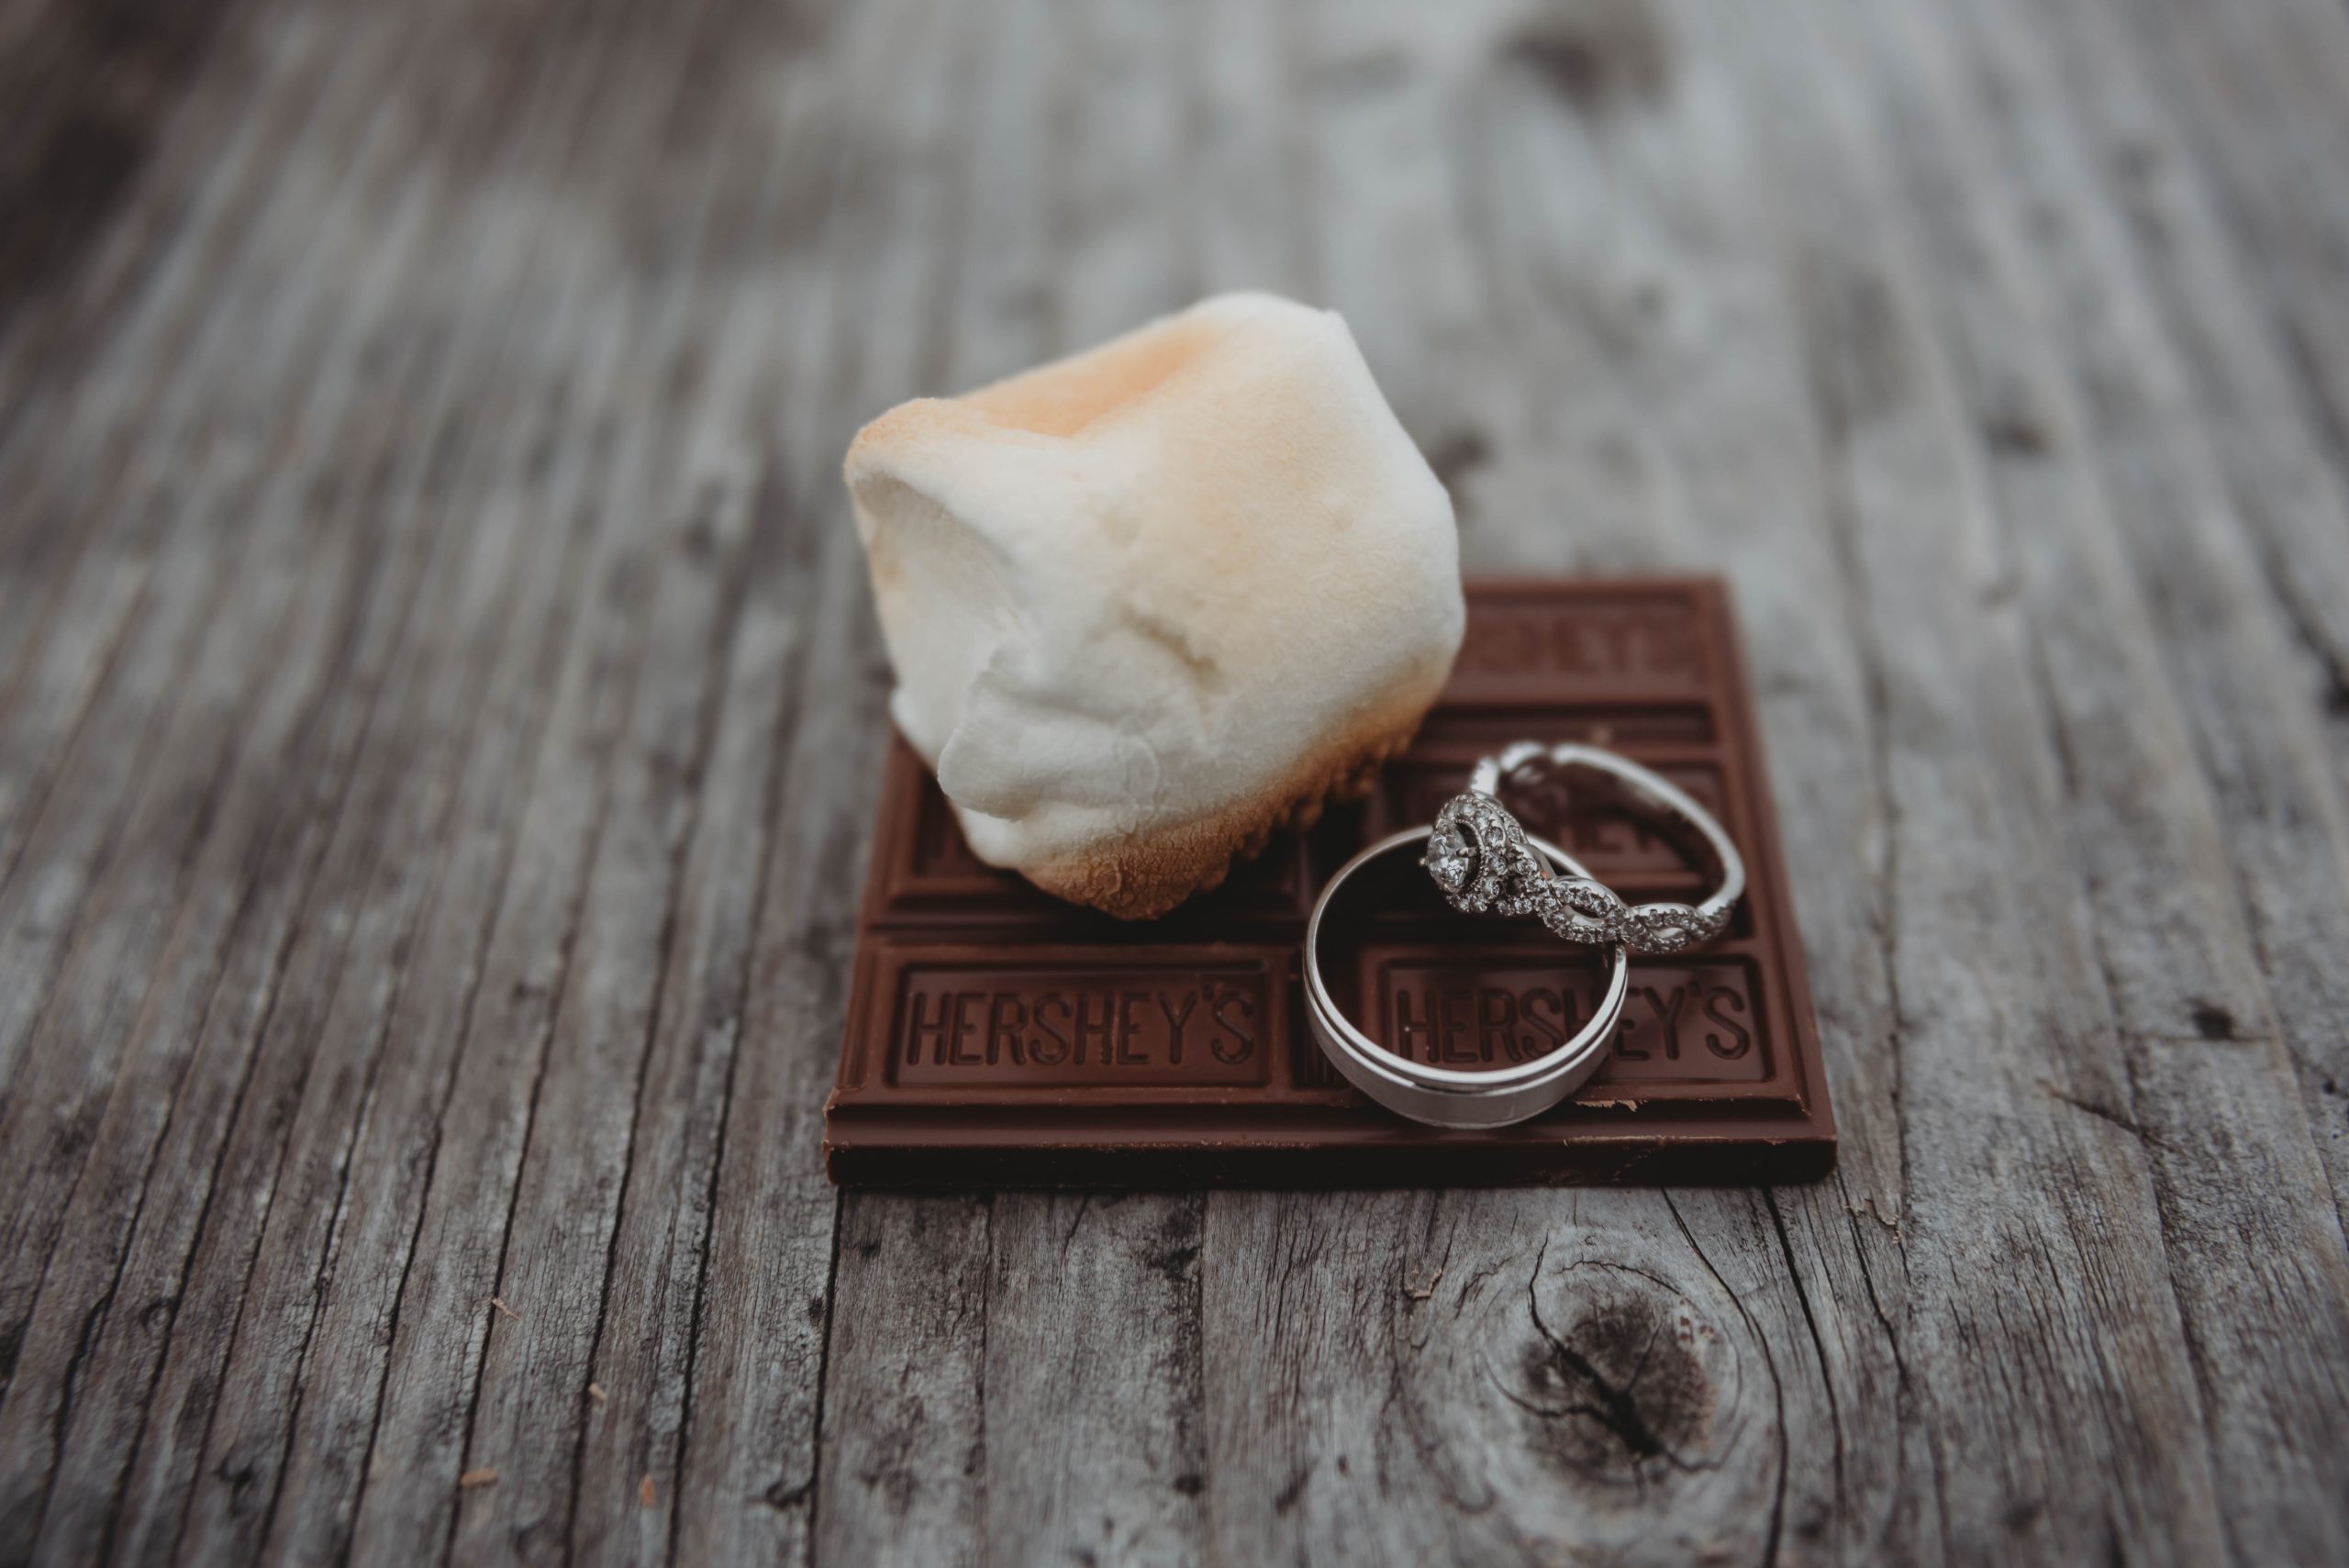 Wedding rings romantically sit next to a perfectly toasted marshmallow on a bar of chocolate.